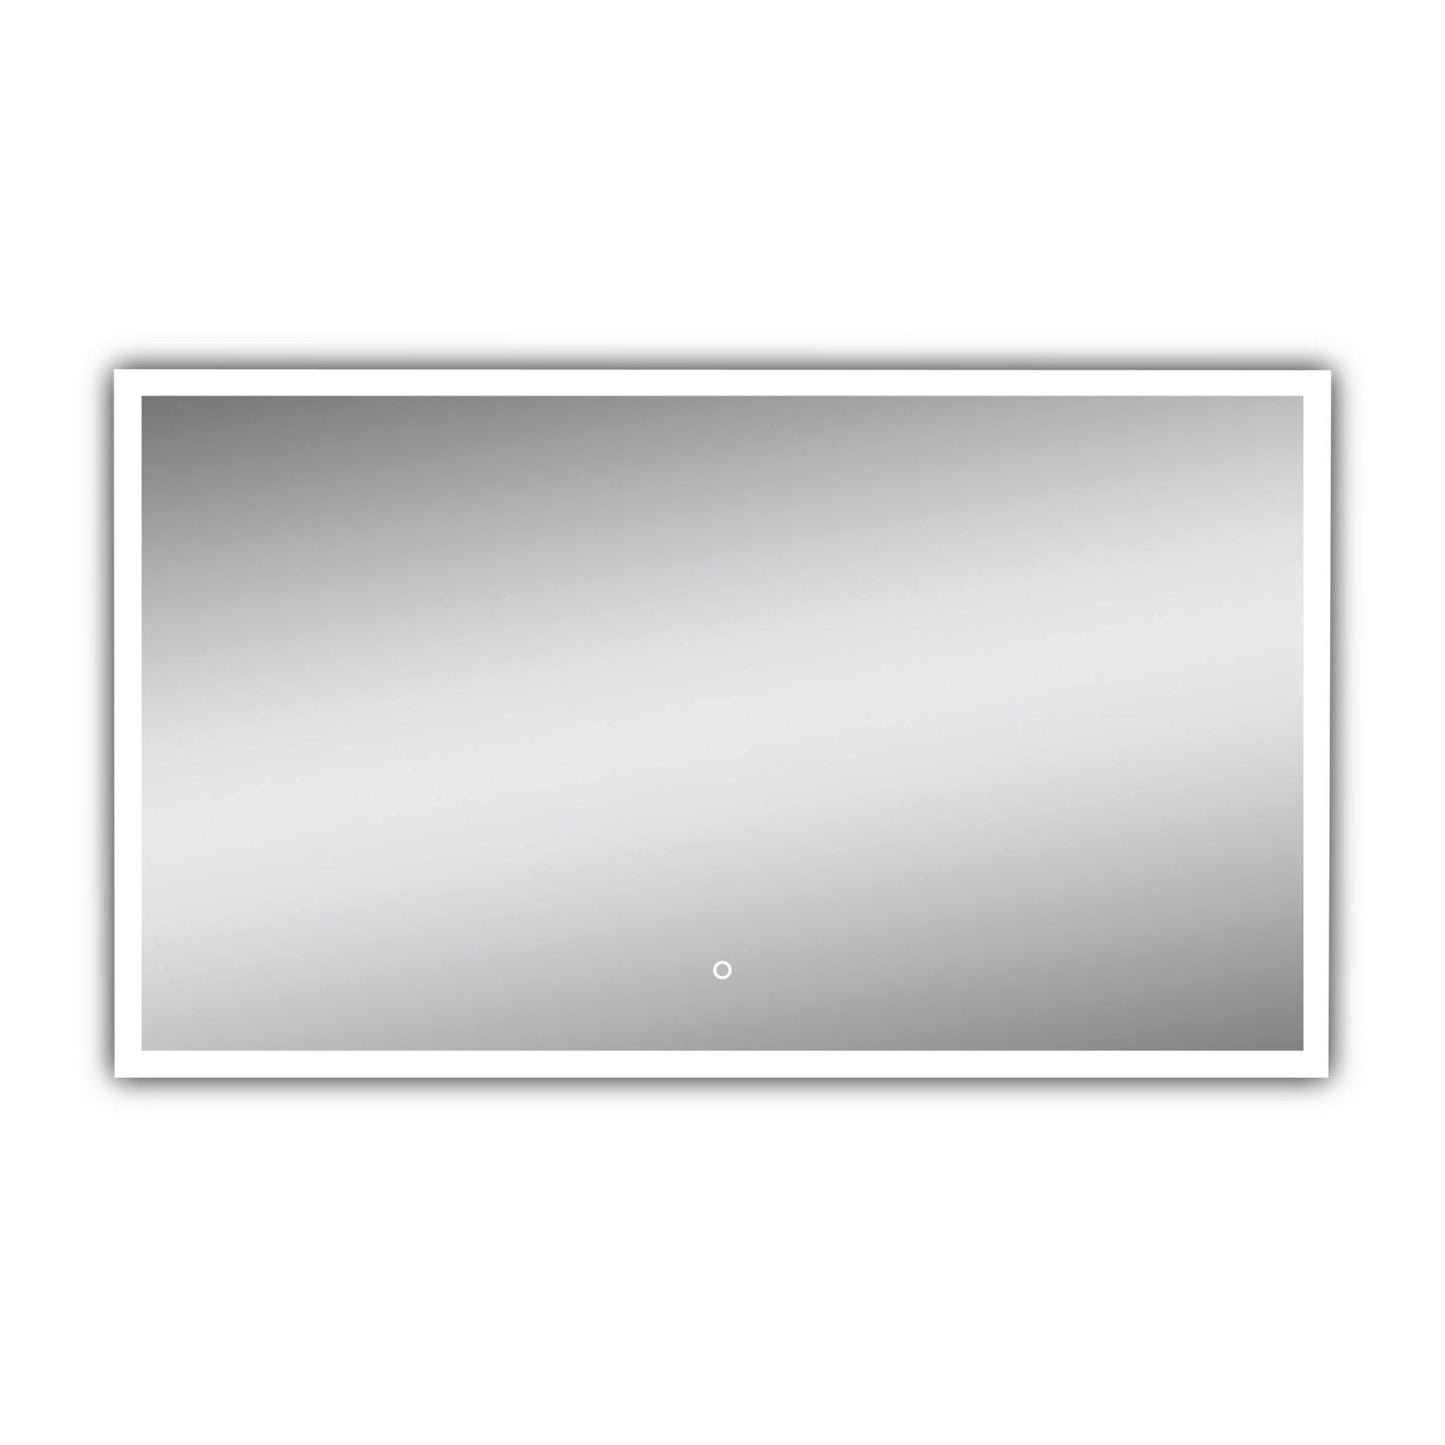 Ratel 47" x 28" Rectangular LED Mirror With Touch Sensor Switch and White Acrylic Frame